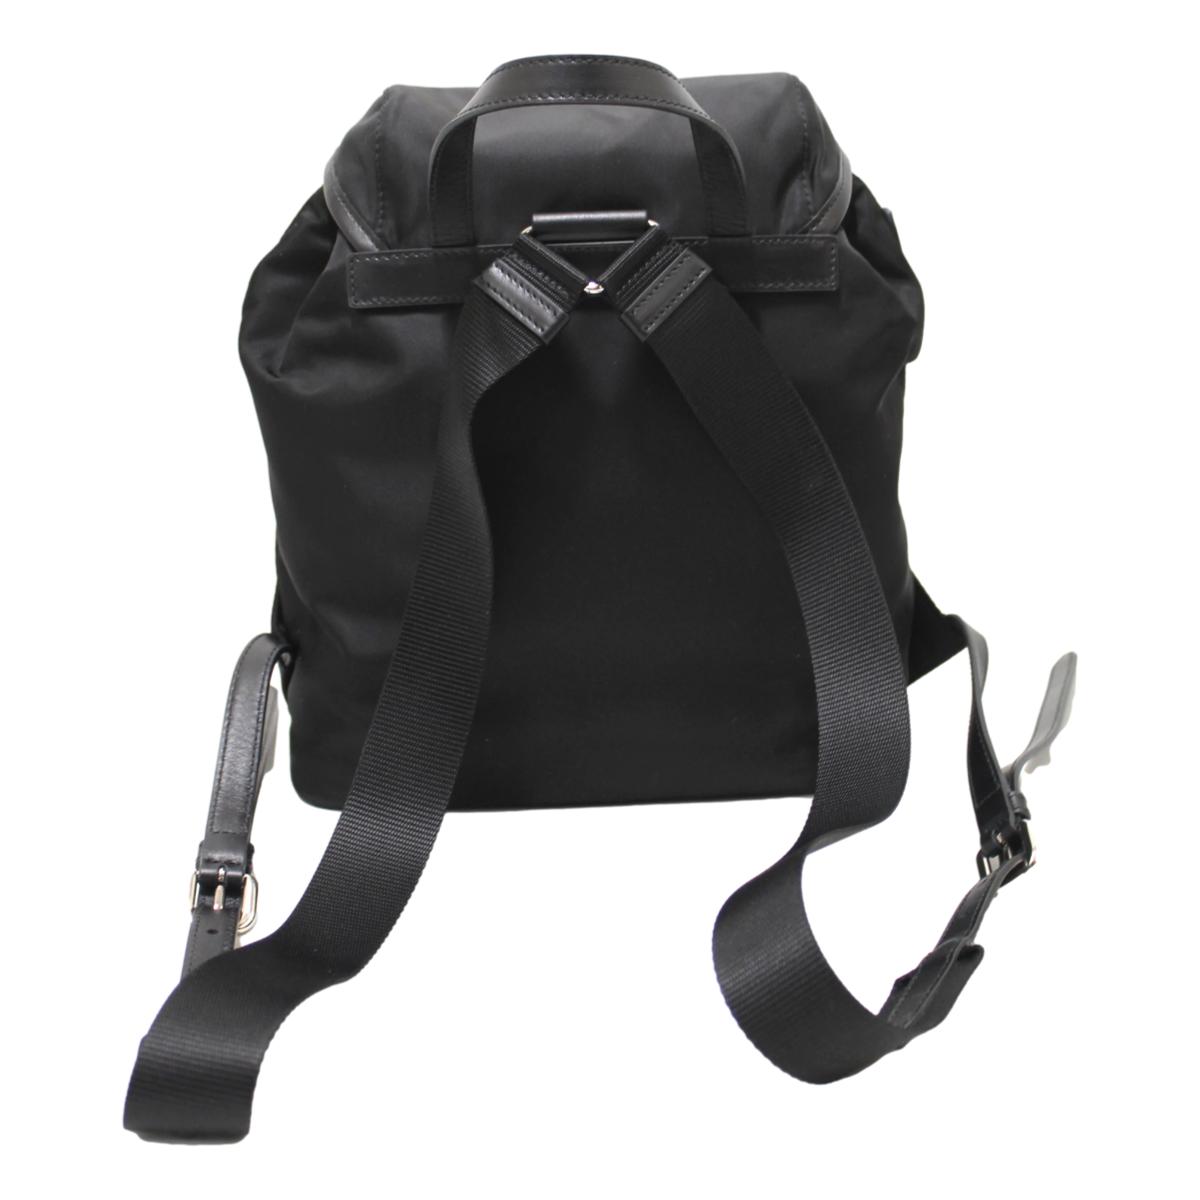 Prada Black Tessuto Nylon Soft Calf Leather Adjustable Backpack 1BZ677 at_Queen_Bee_of_Beverly_Hills